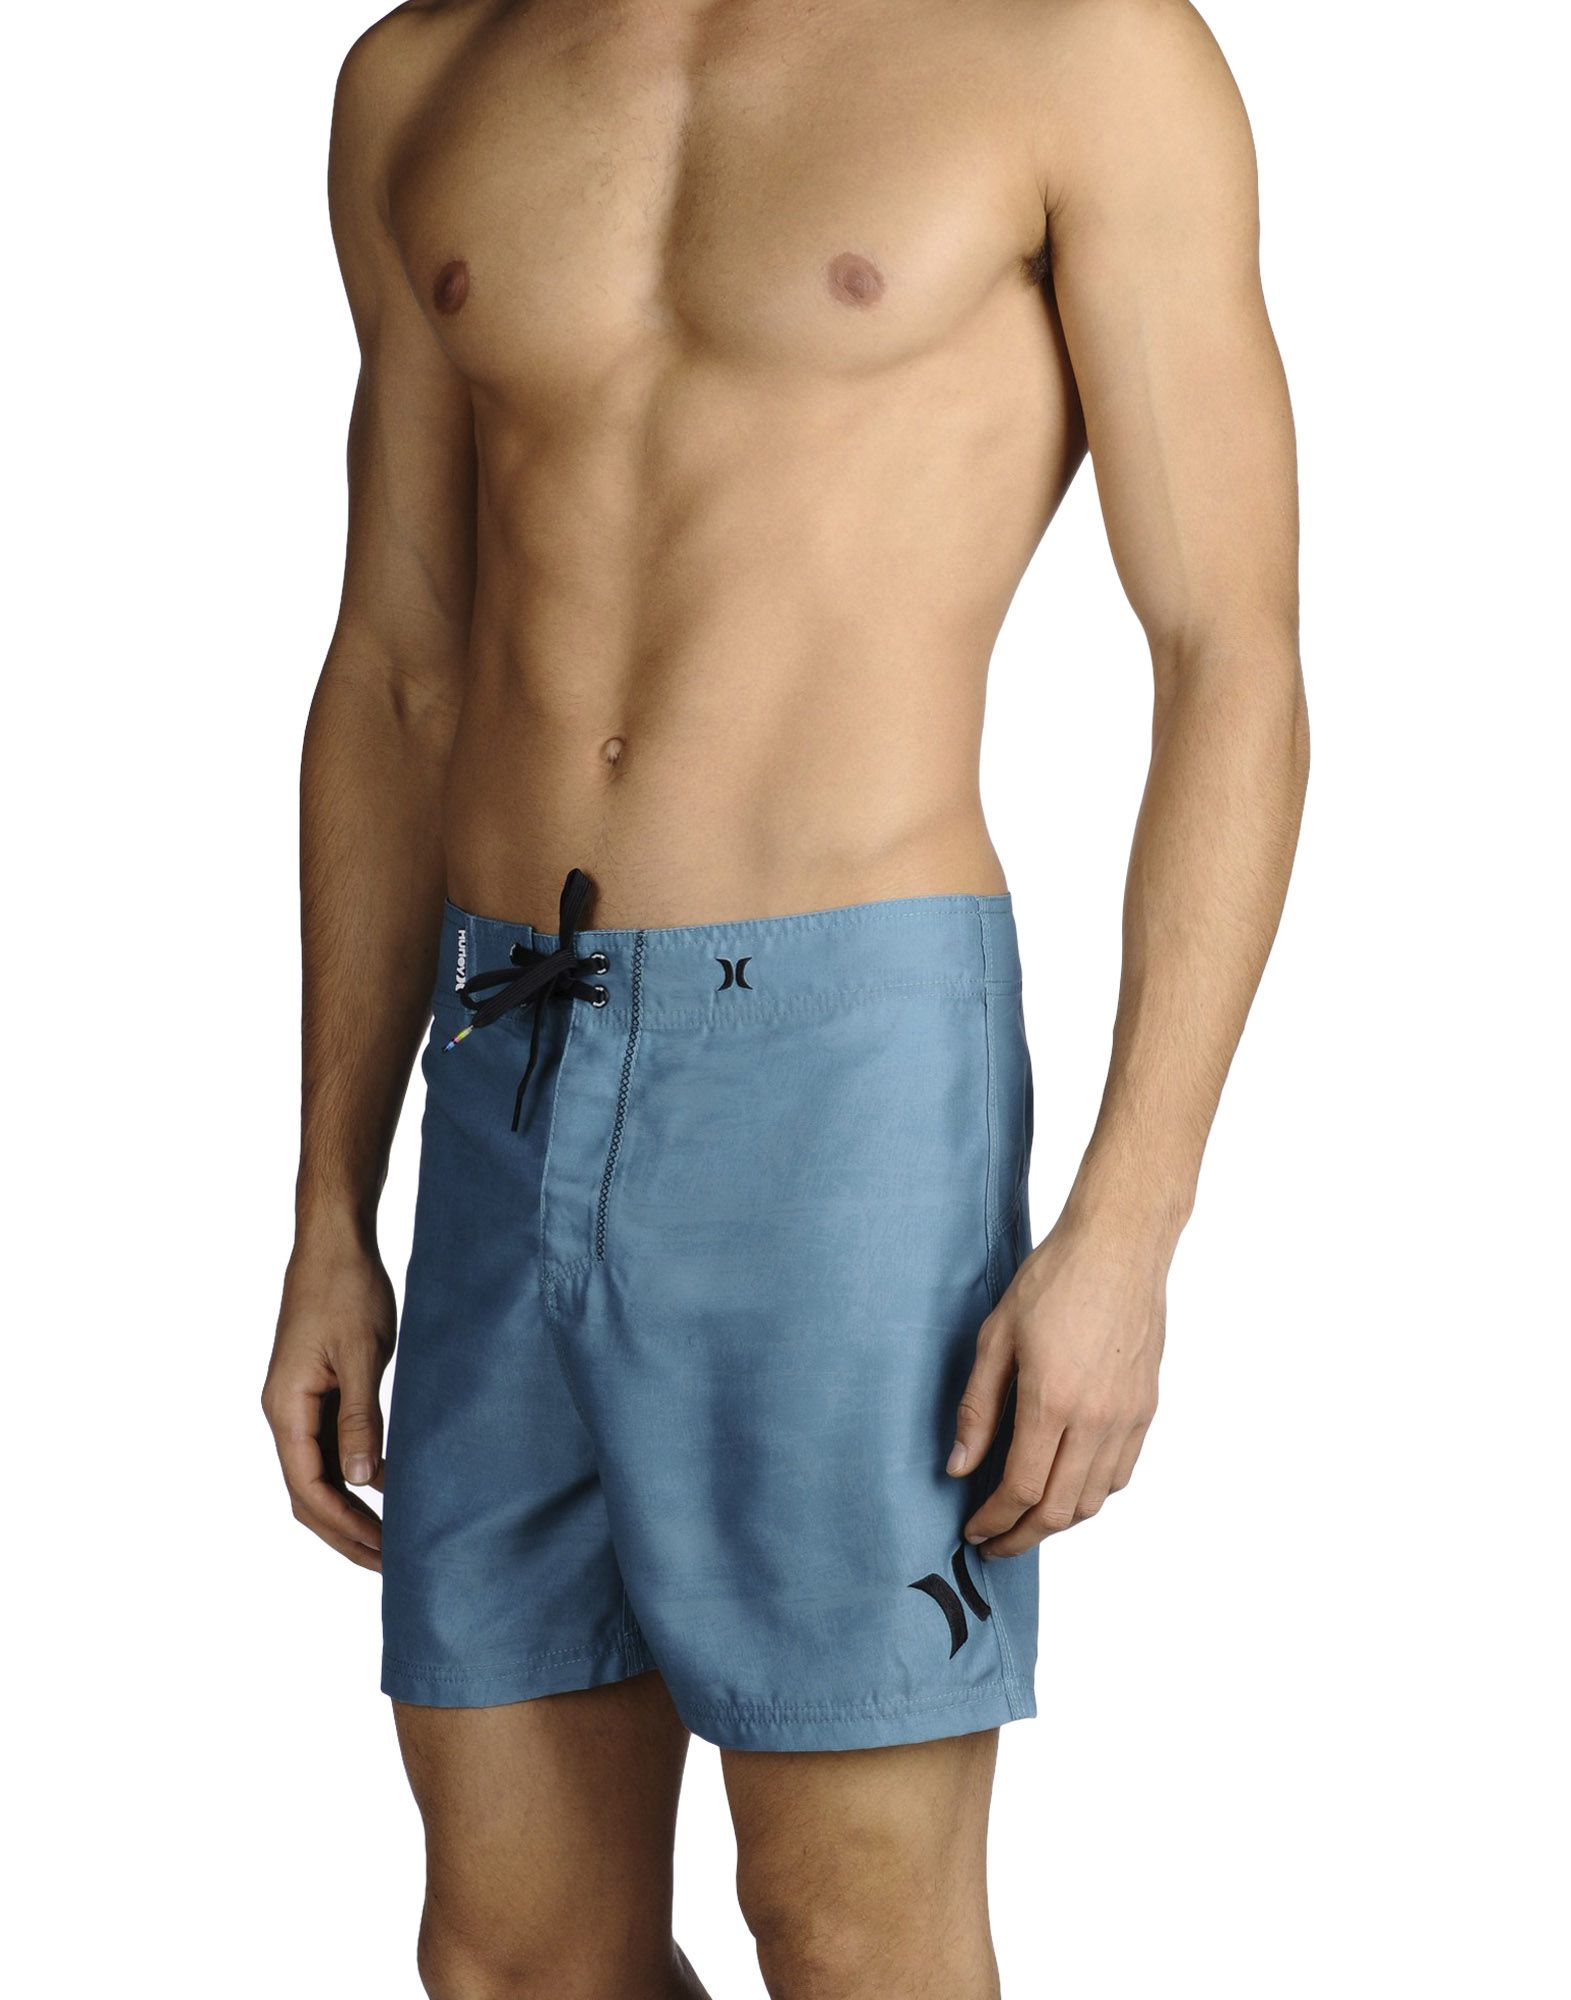 Hurley Synthetic Swimming Trunks in Deep Jade (Blue) for Men - Lyst